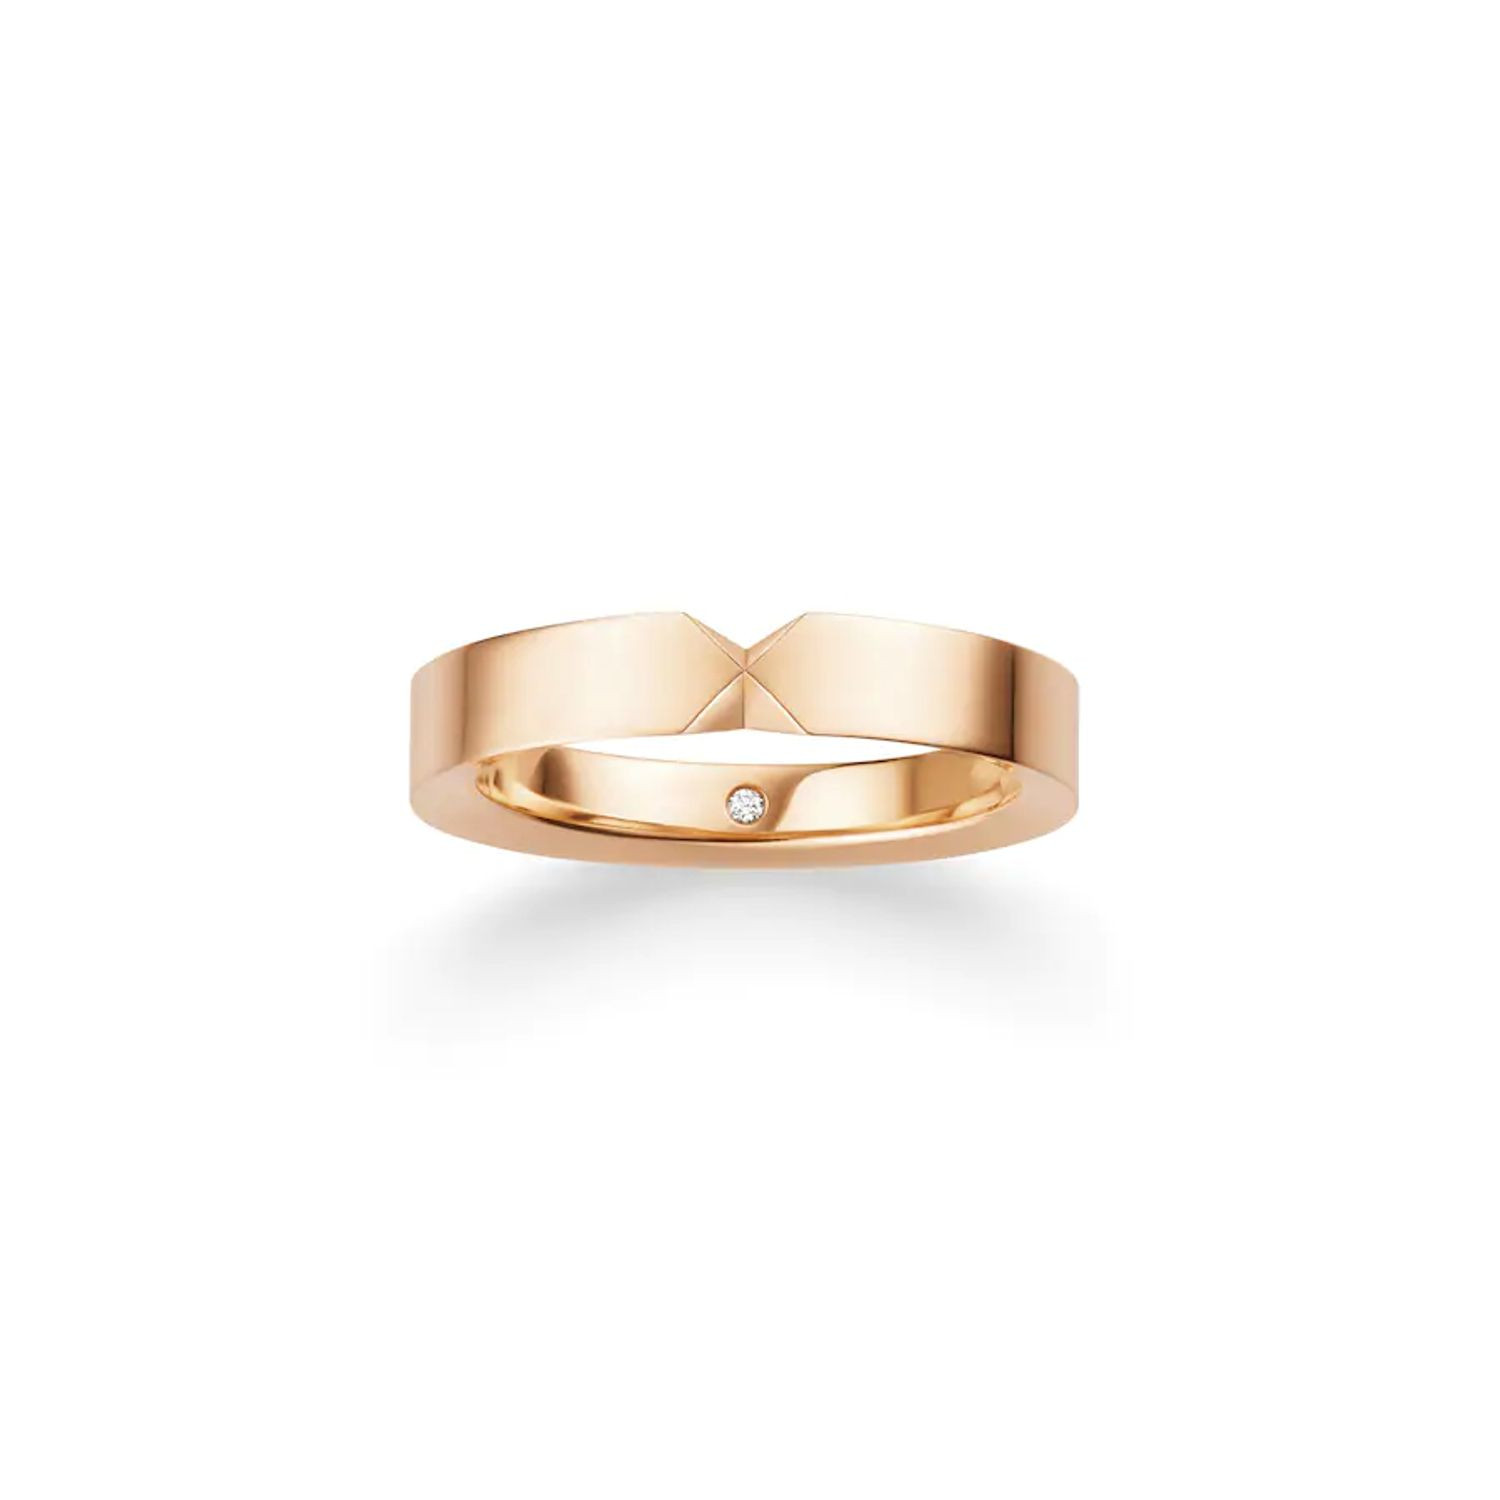 Triumph wedding ring 4.5mm pink gold set with a secret diamond in the body of the ring.